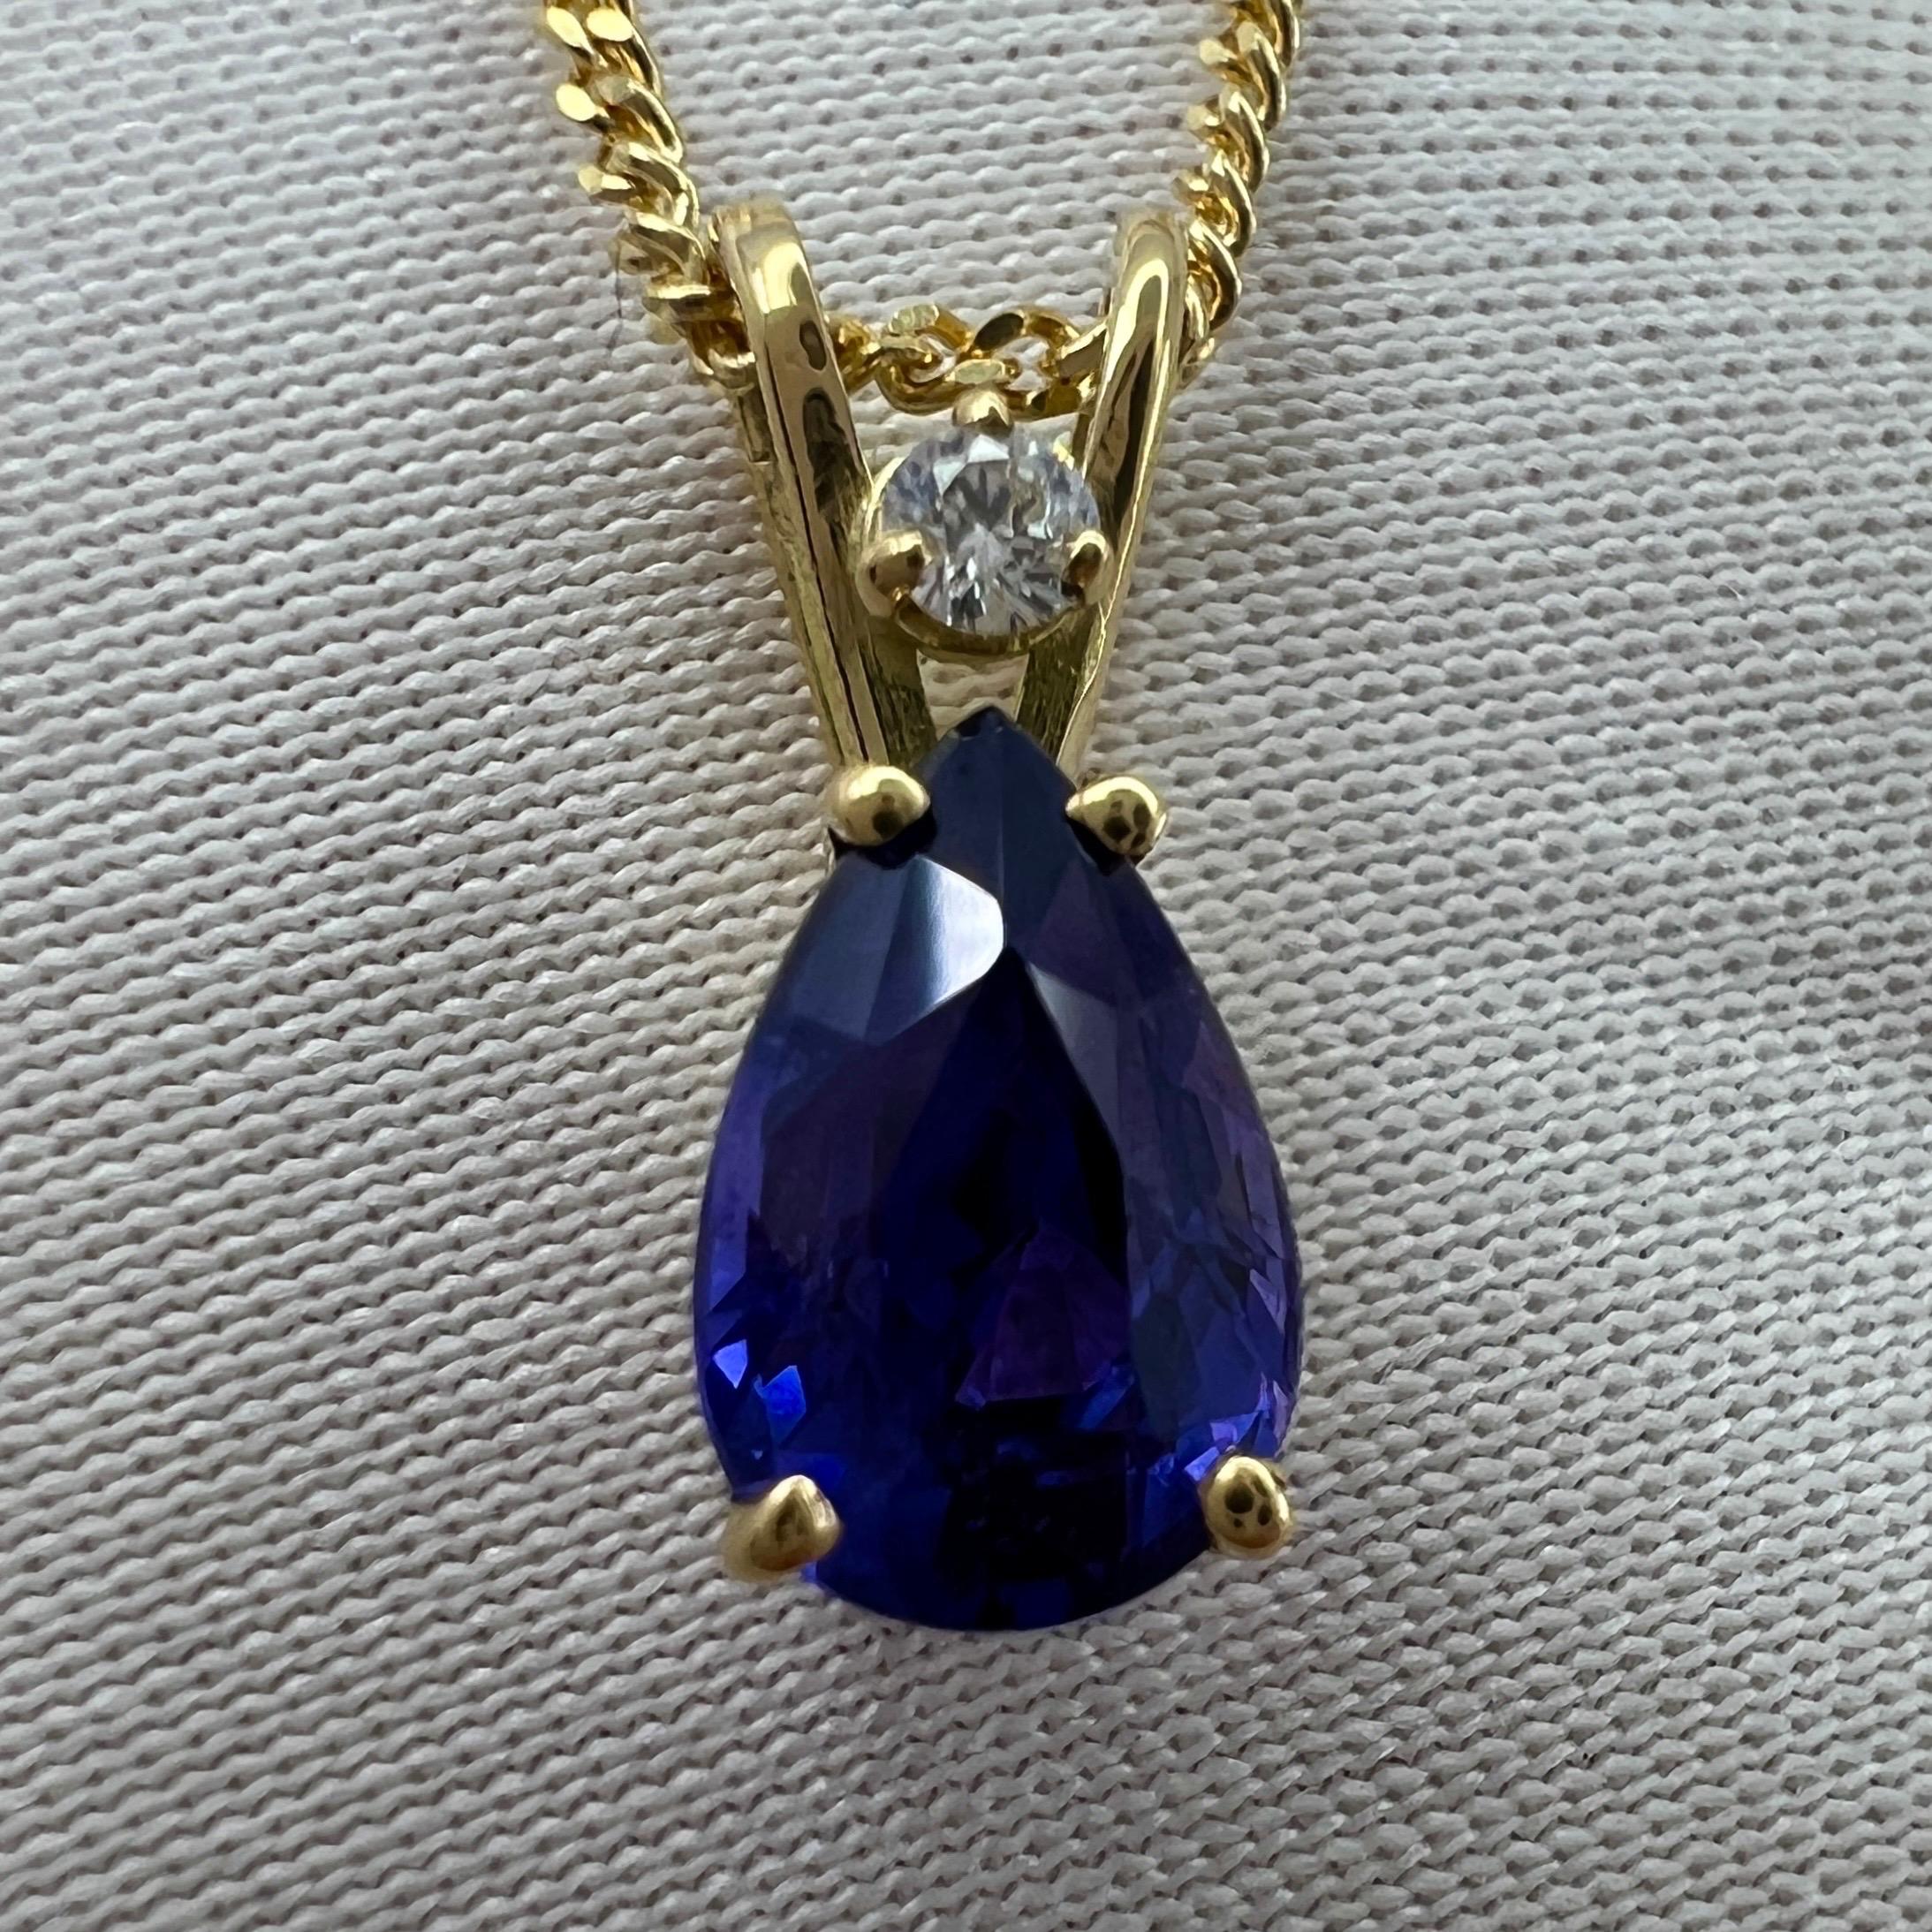 Deep Blue Purple Pear Cut Sapphire & Diamond 18k Yellow Gold Pendant.

Fine 1.03 carat natural sapphire with a unique deep blue purple colour and very good clarity, very clean stone with only some small natural inclusions visible when looking